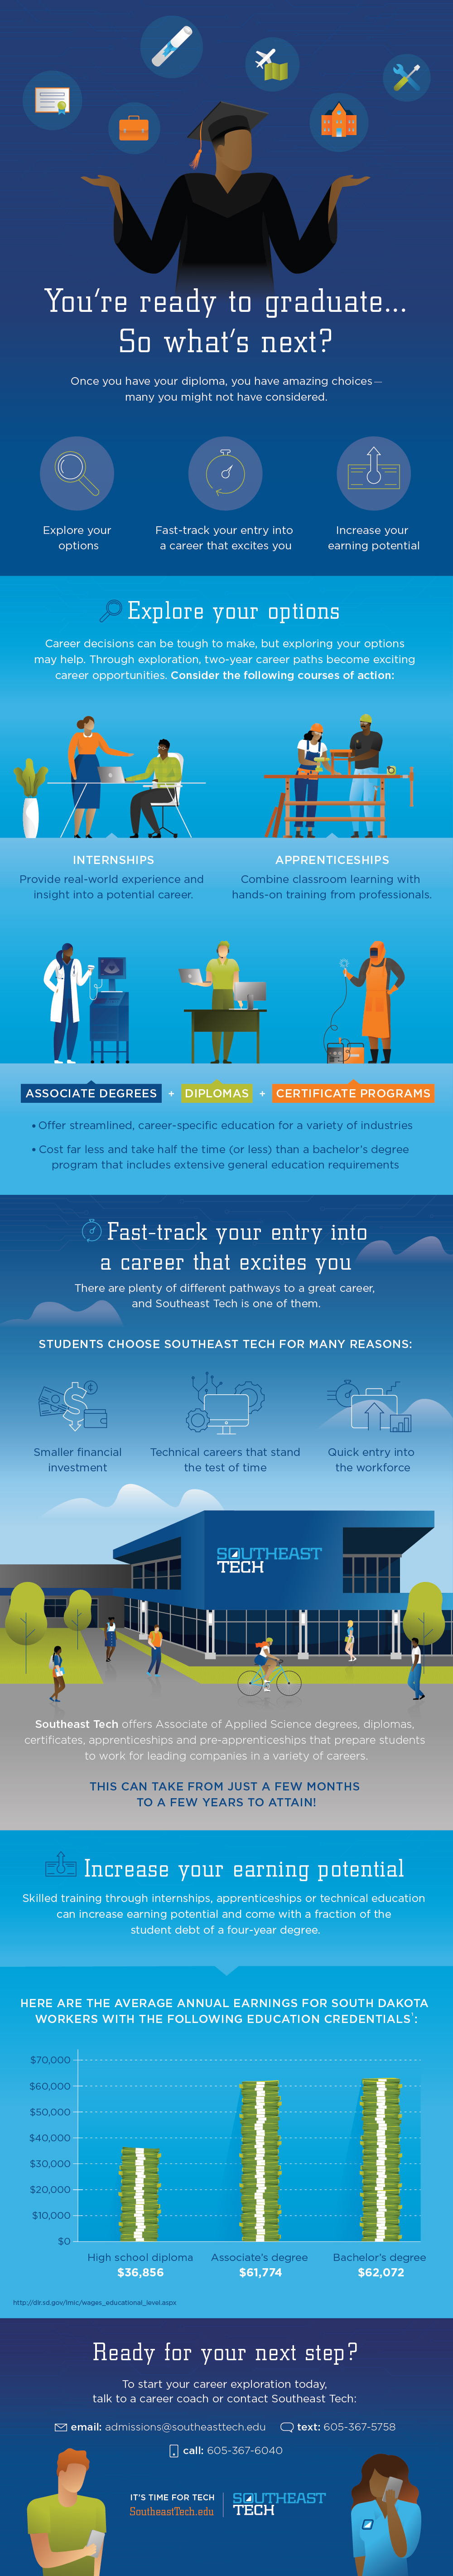 What’s Next After Graduation Infographic